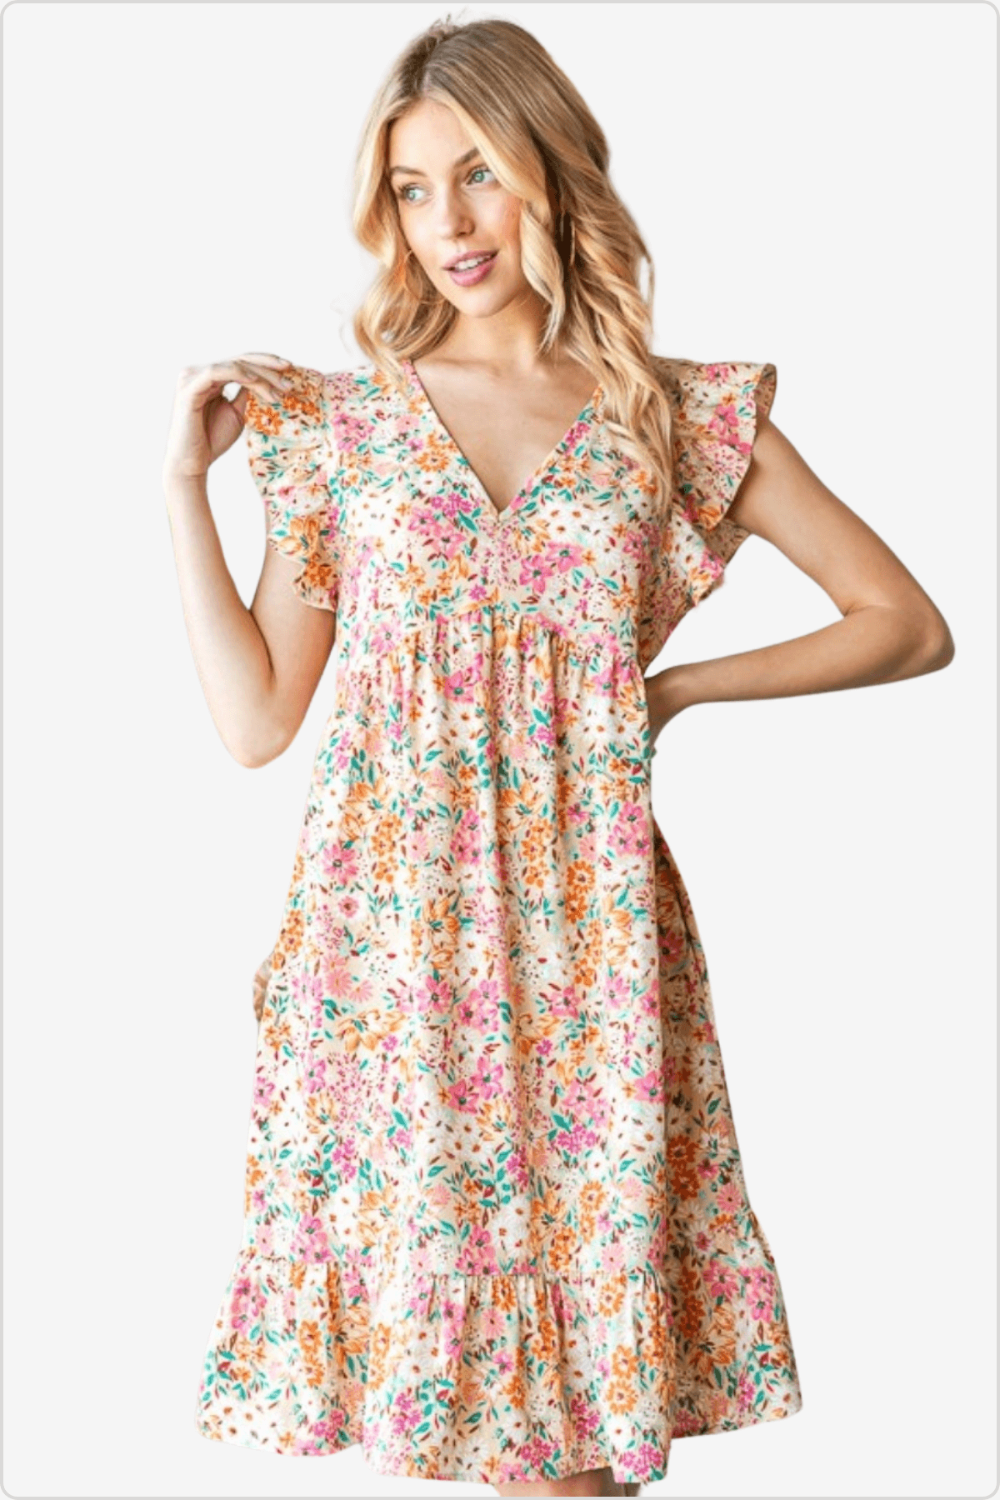 Blonde woman modeling a short floral dress with frill sleeves, ideal for summer casual wear.